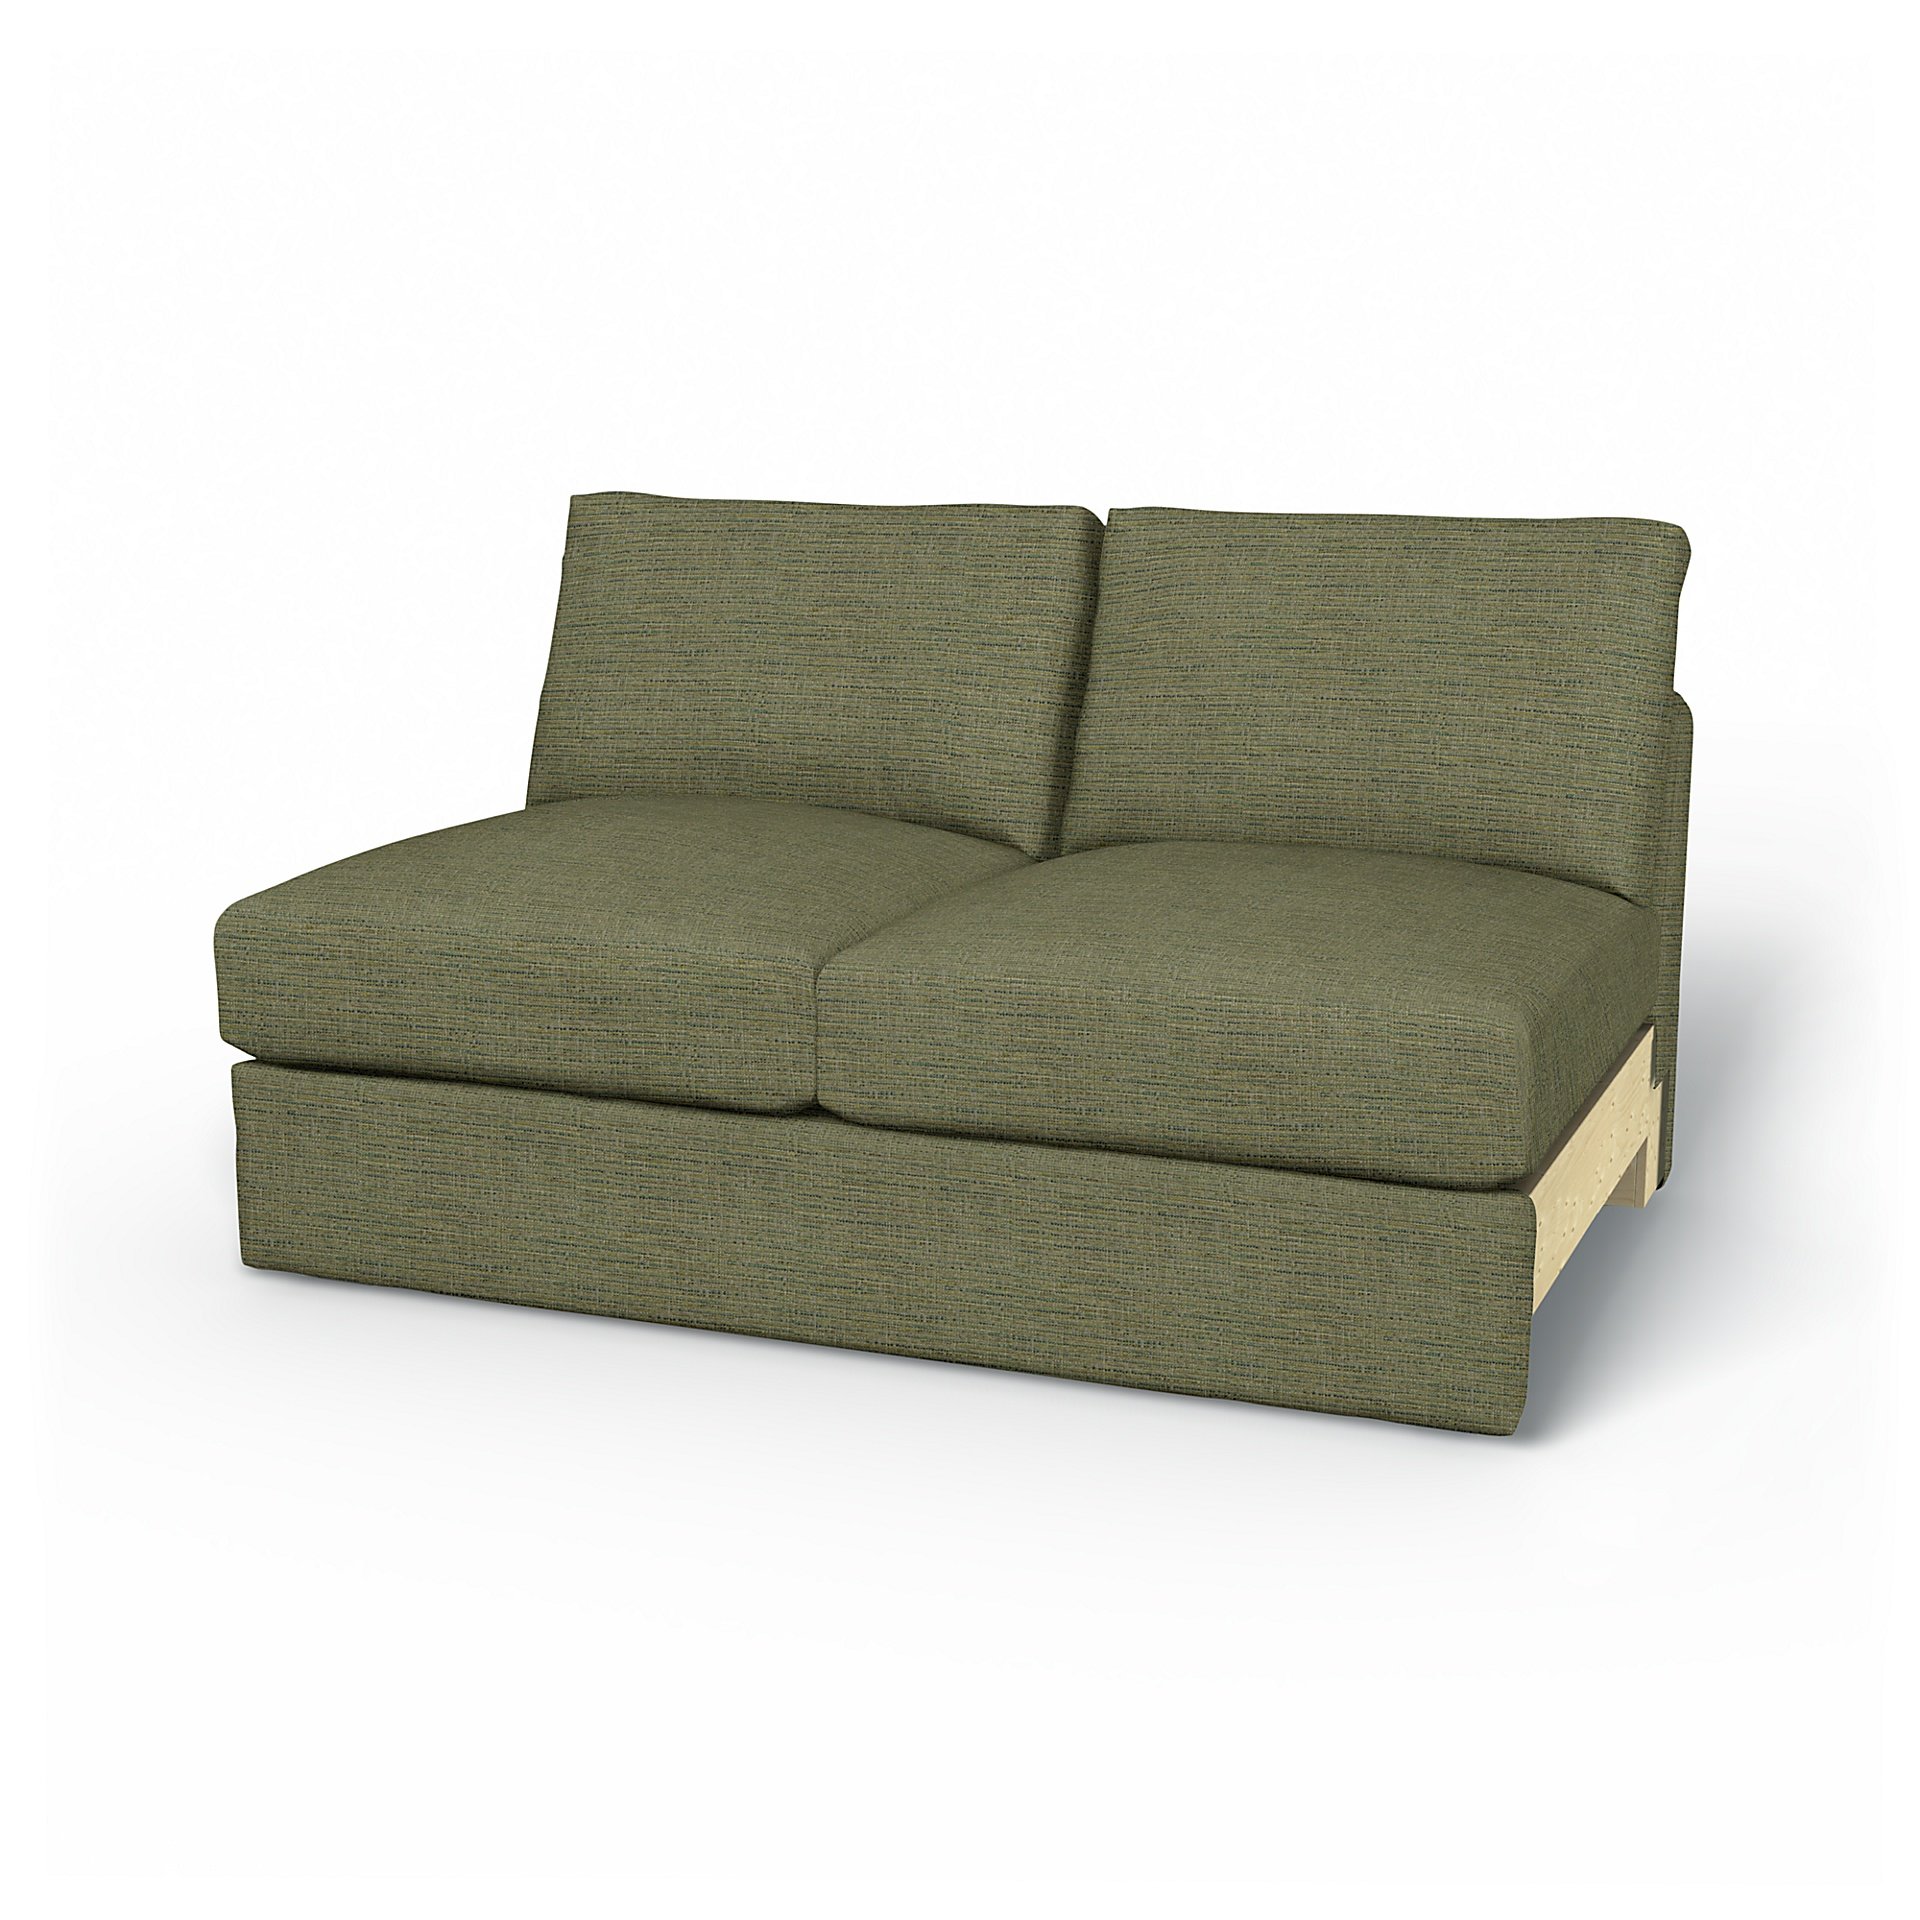 IKEA - Vimle 2 seater bed sofa without armrests, Meadow Green, Boucle & Texture - Bemz